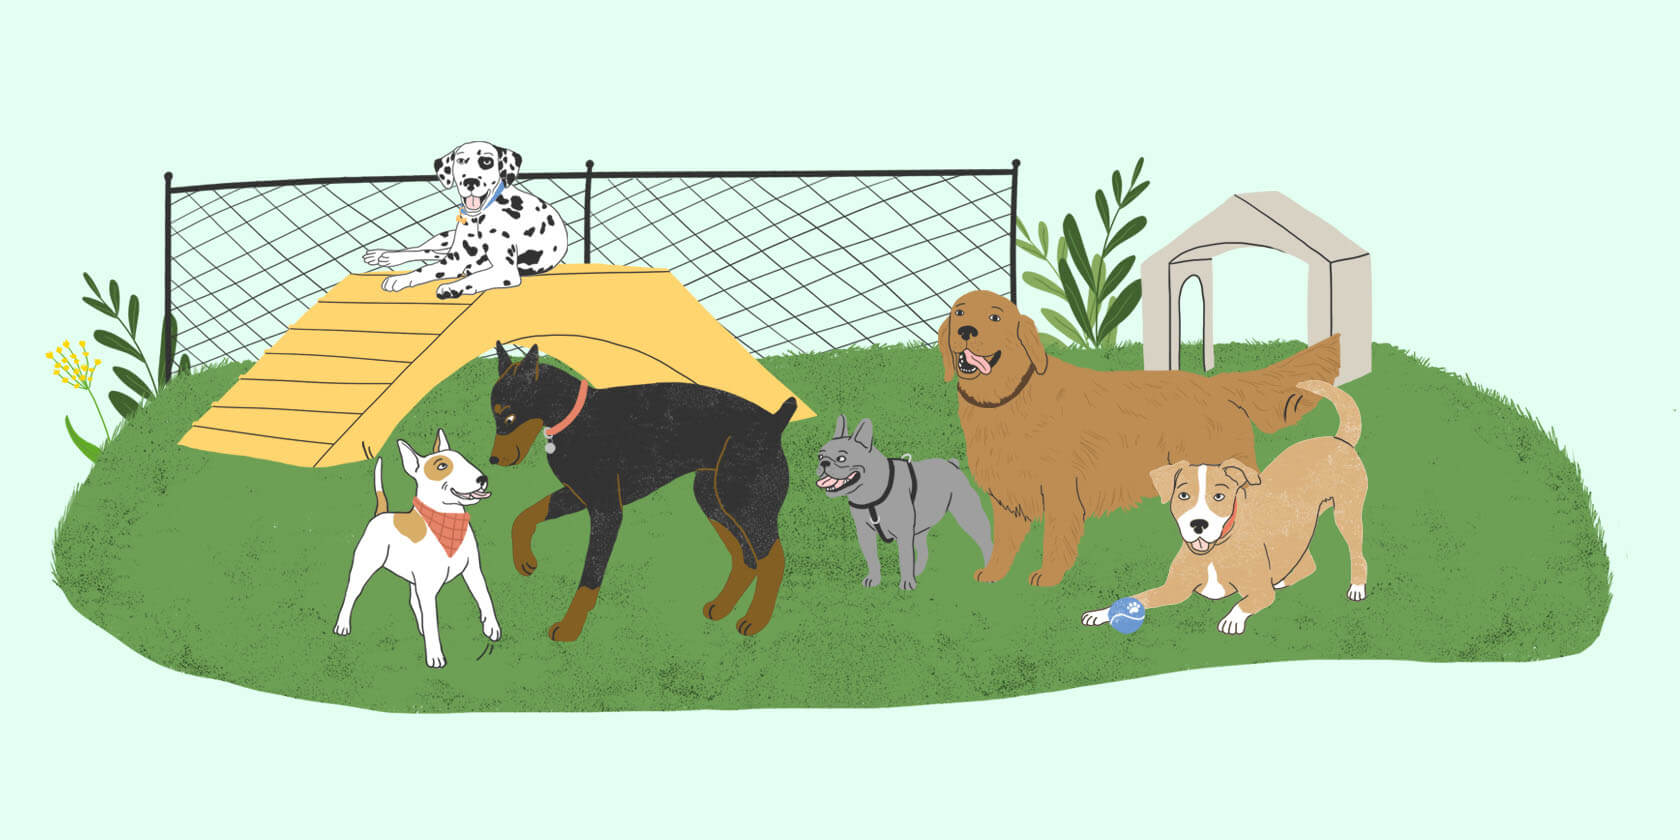 Illustrated dogs playing in a dog park.